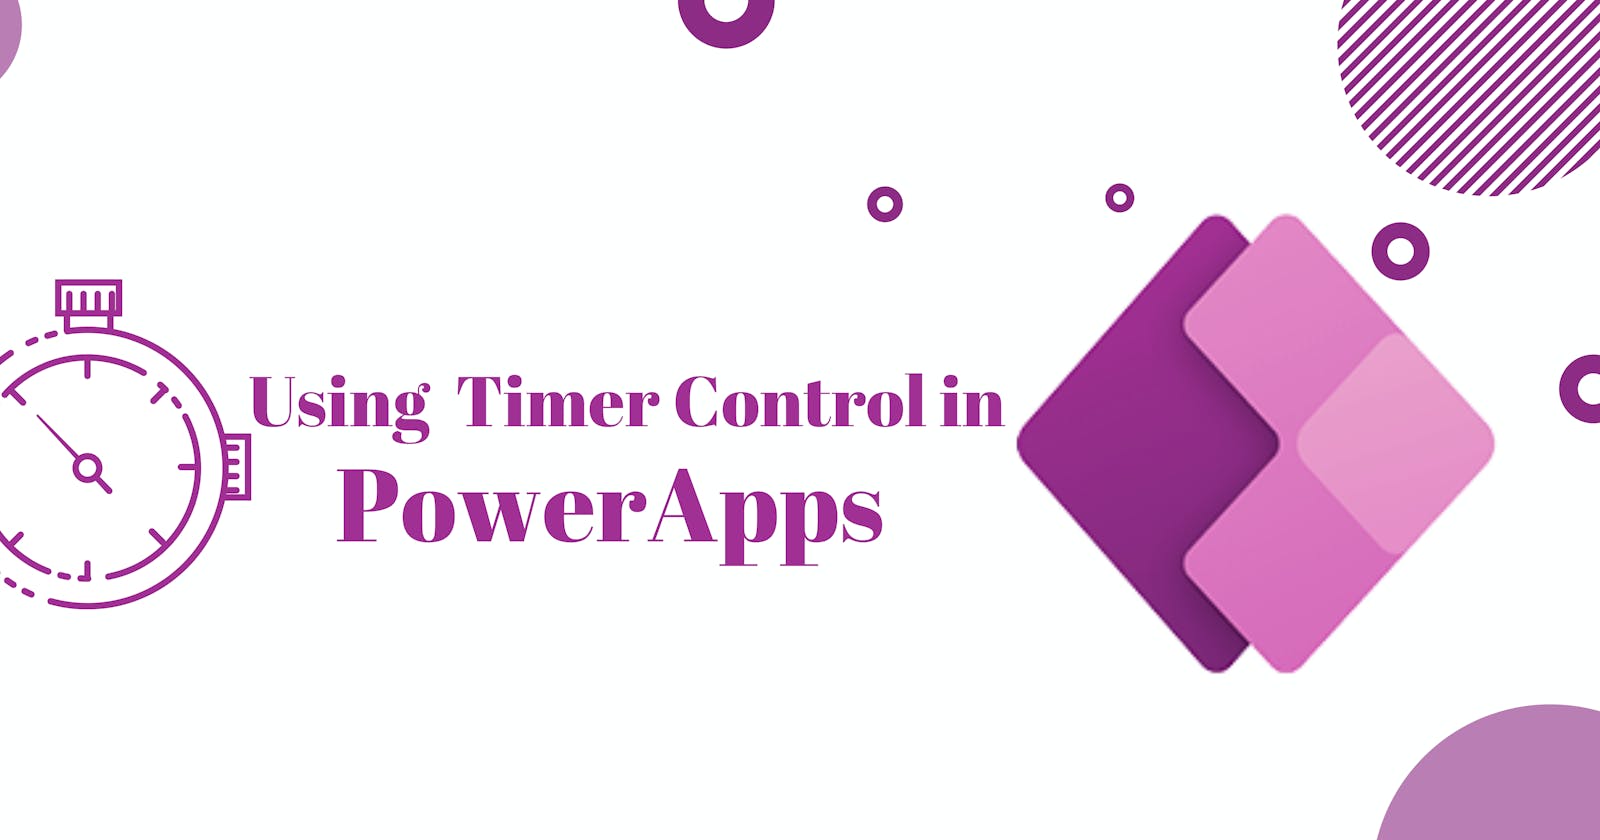 Using Timer Control in PowerApps